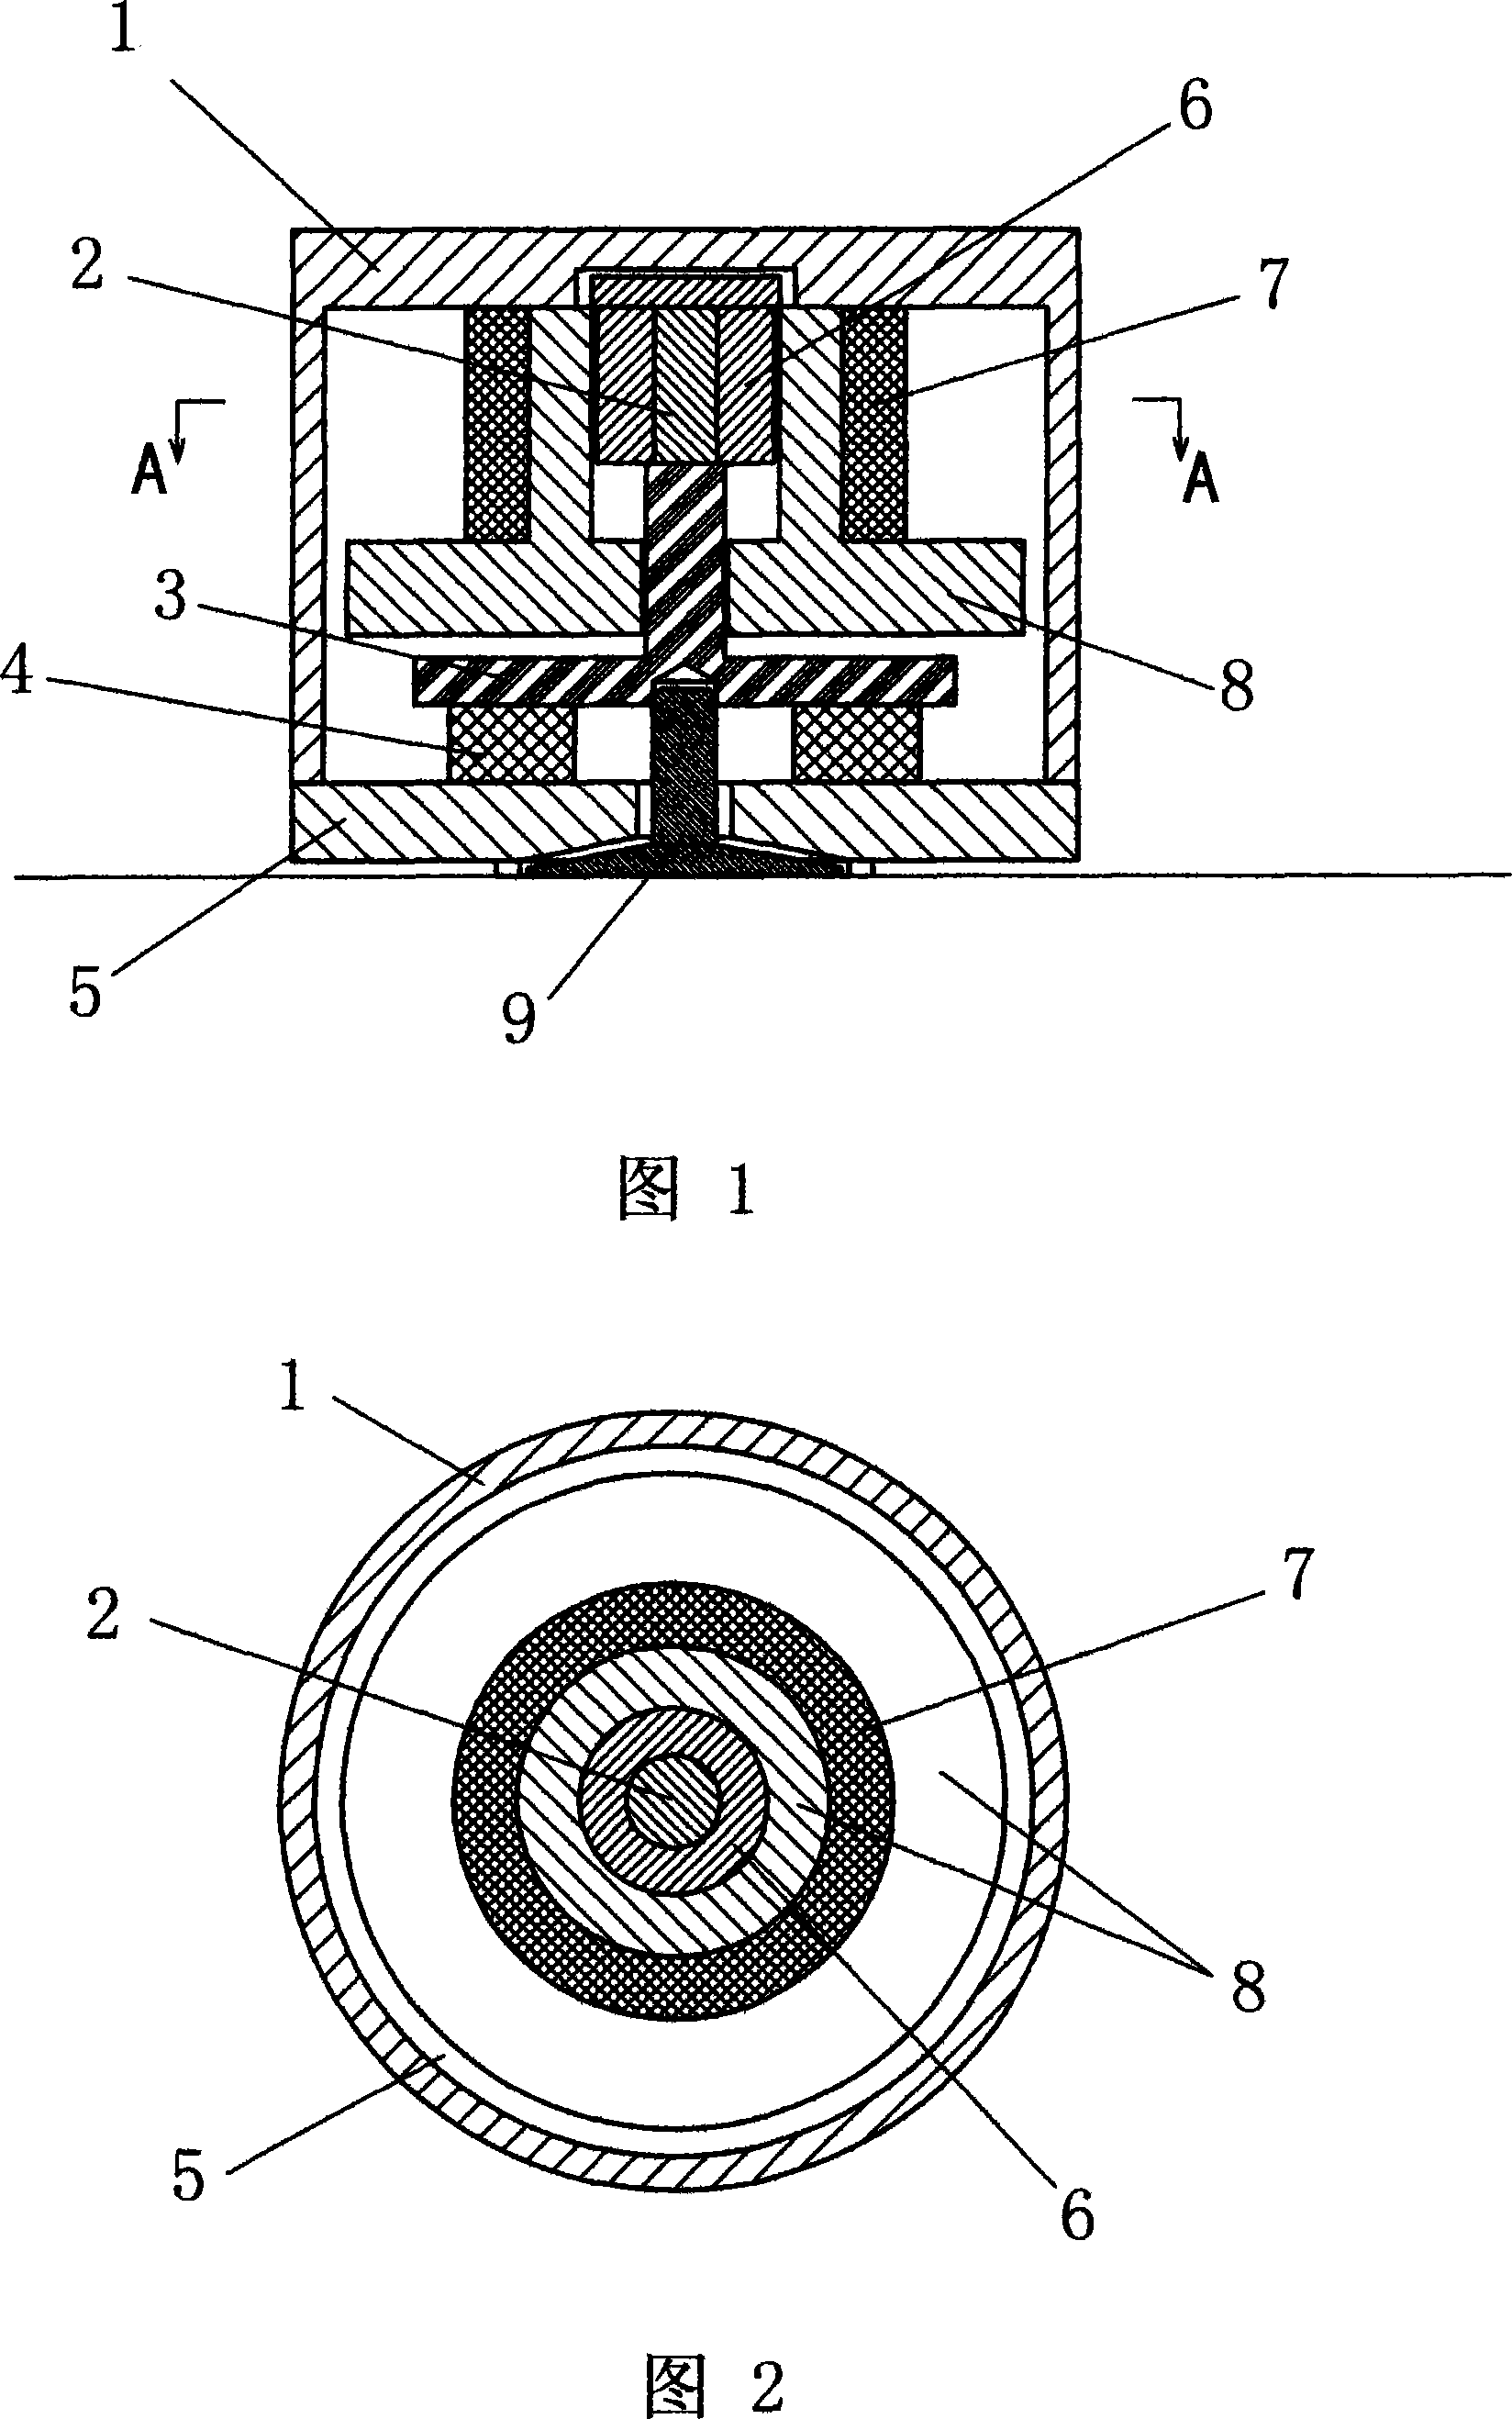 Magnetism driven telescopic driver